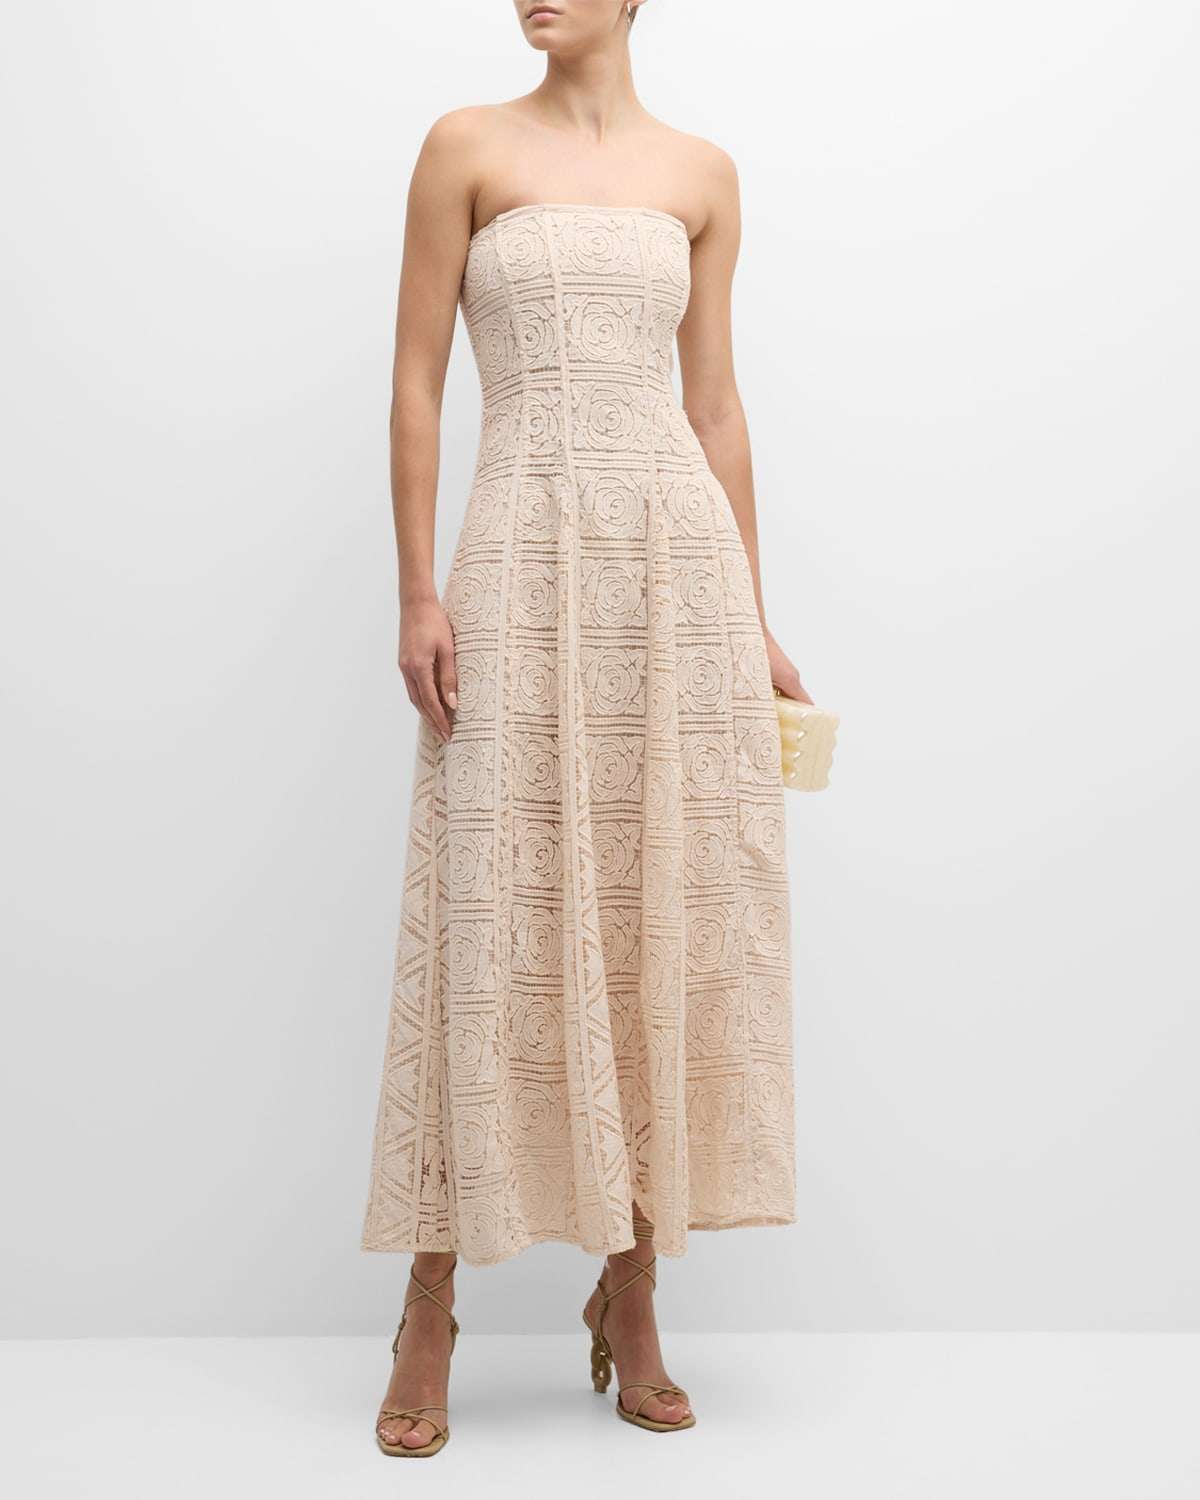 Alice + Olivia Dominique Floral-Embellished Ball Gown